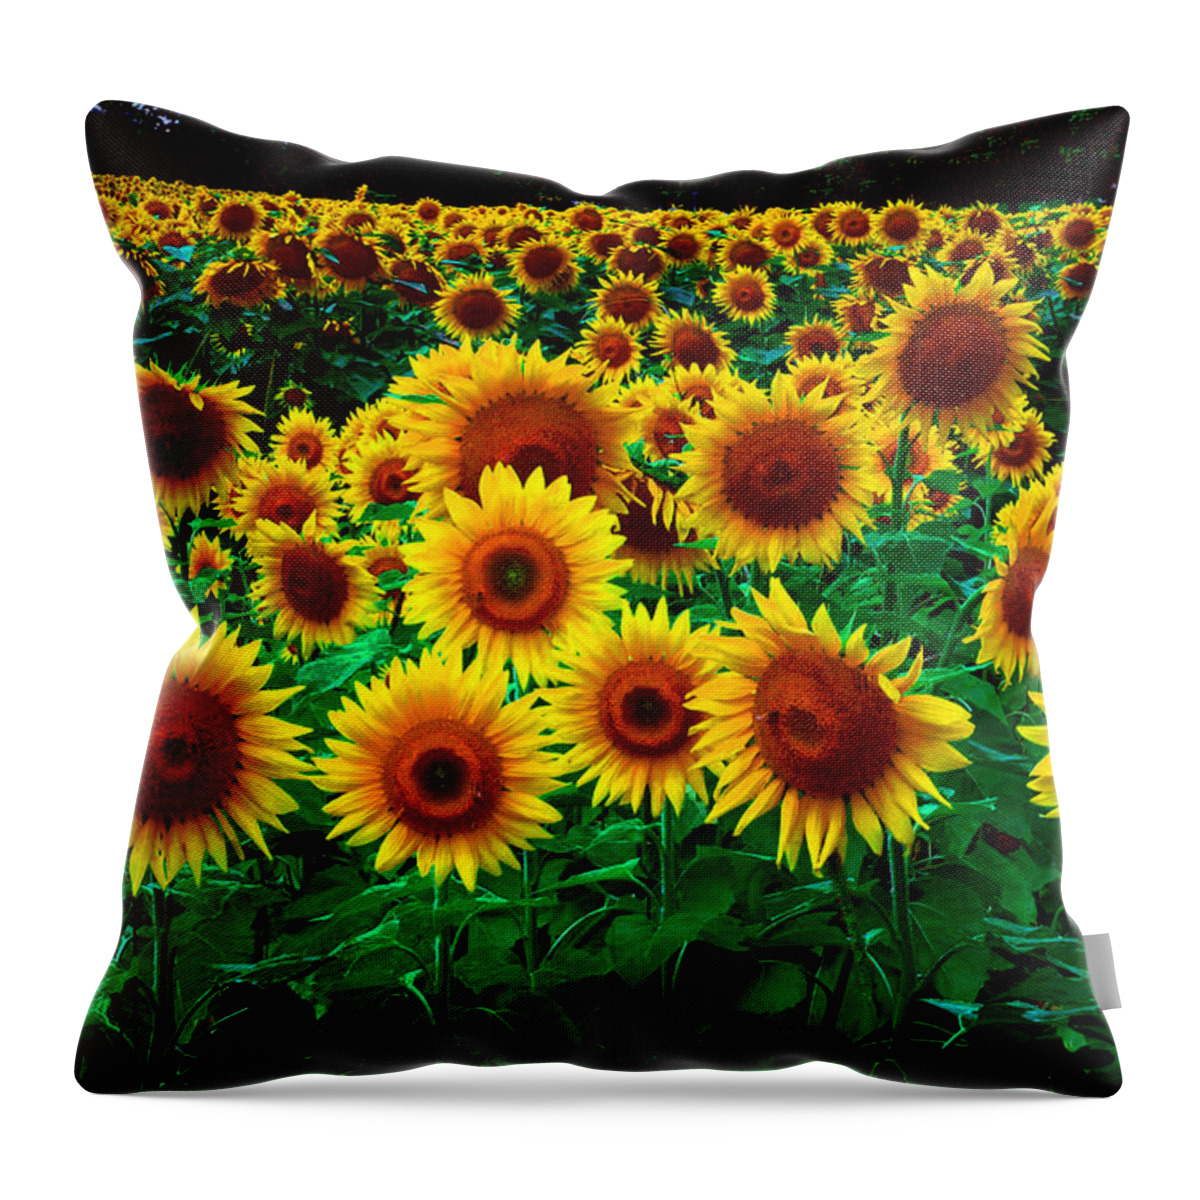 Flowers Throw Pillow featuring the digital art Here Comes the Sun by Richard Ortolano